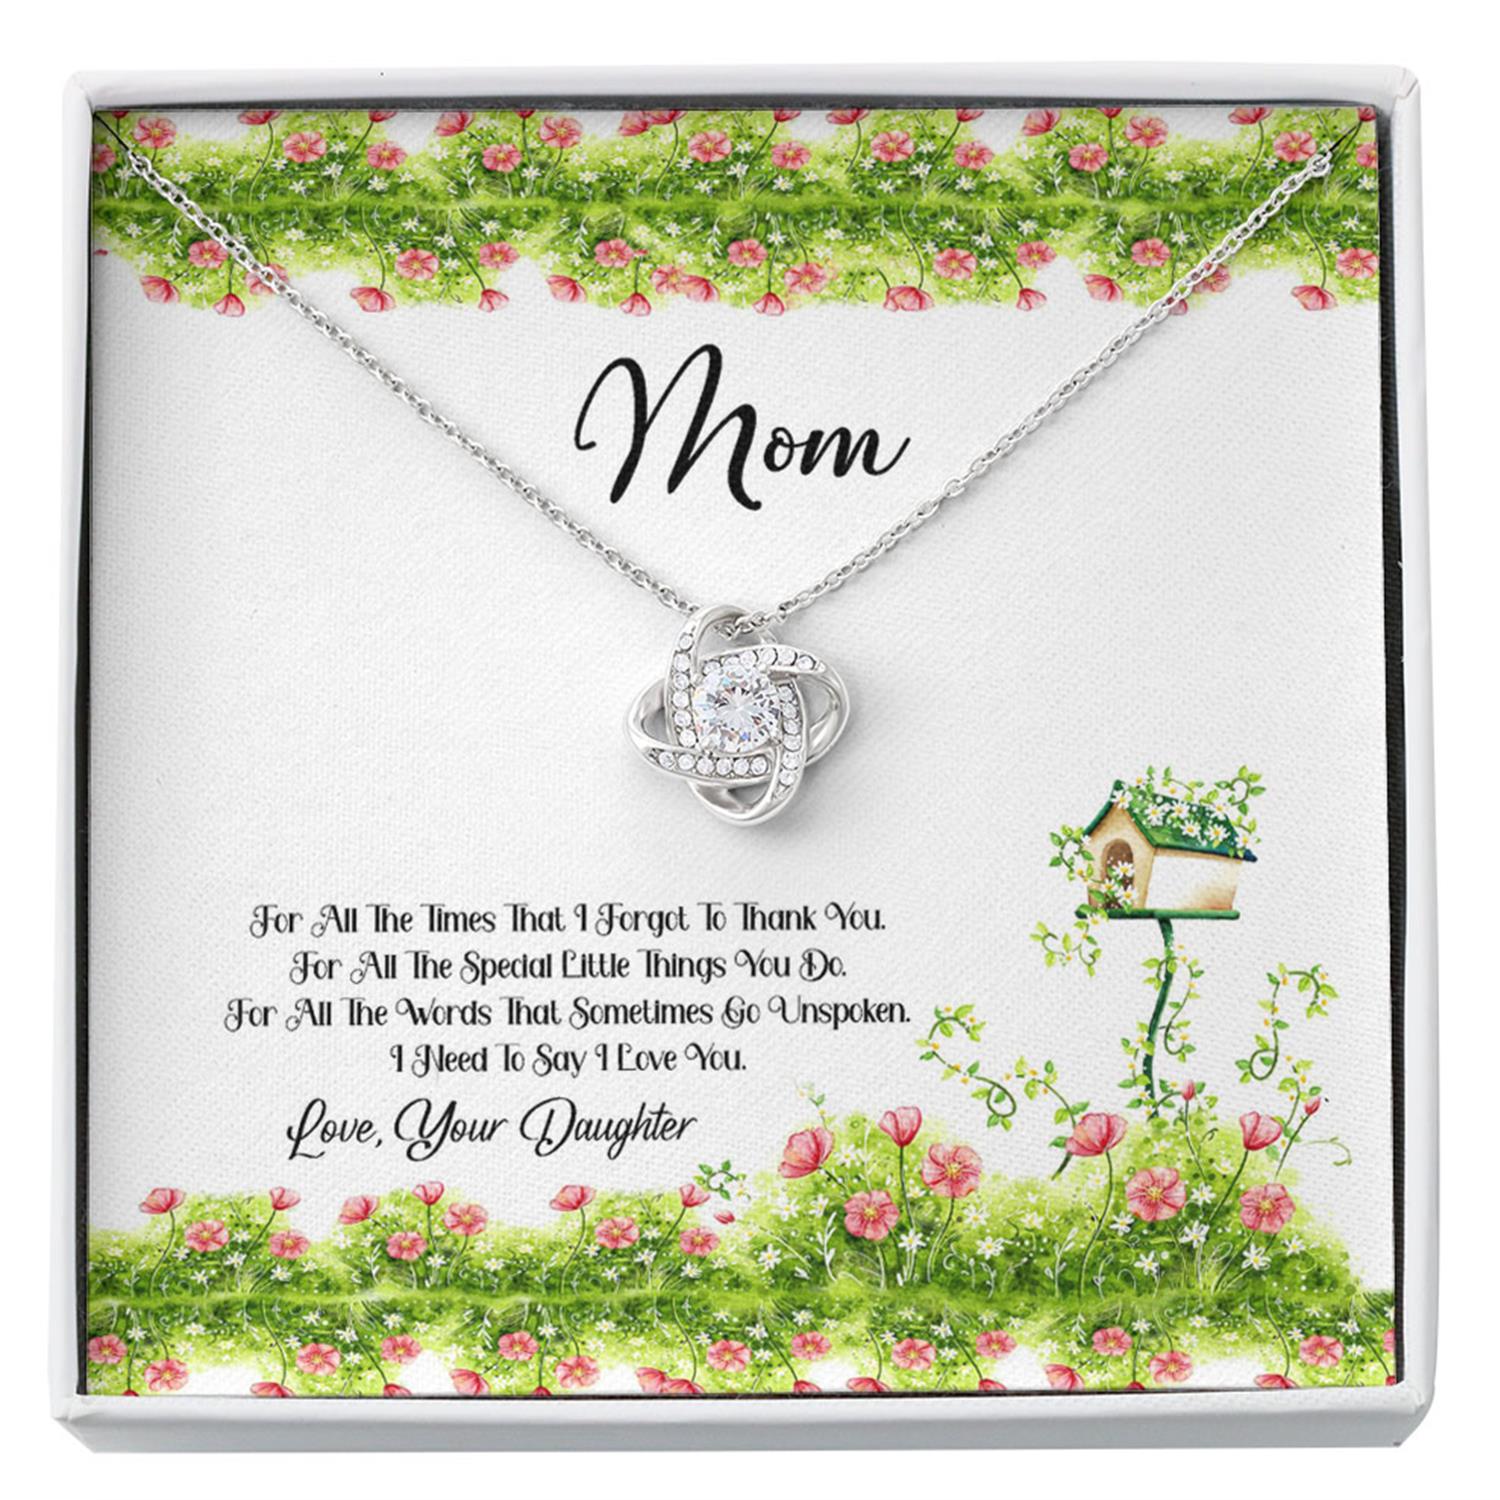 Mom Necklace, Mother Daughter Gift Necklace, Gifts For Mom From Daughter Custom Necklace